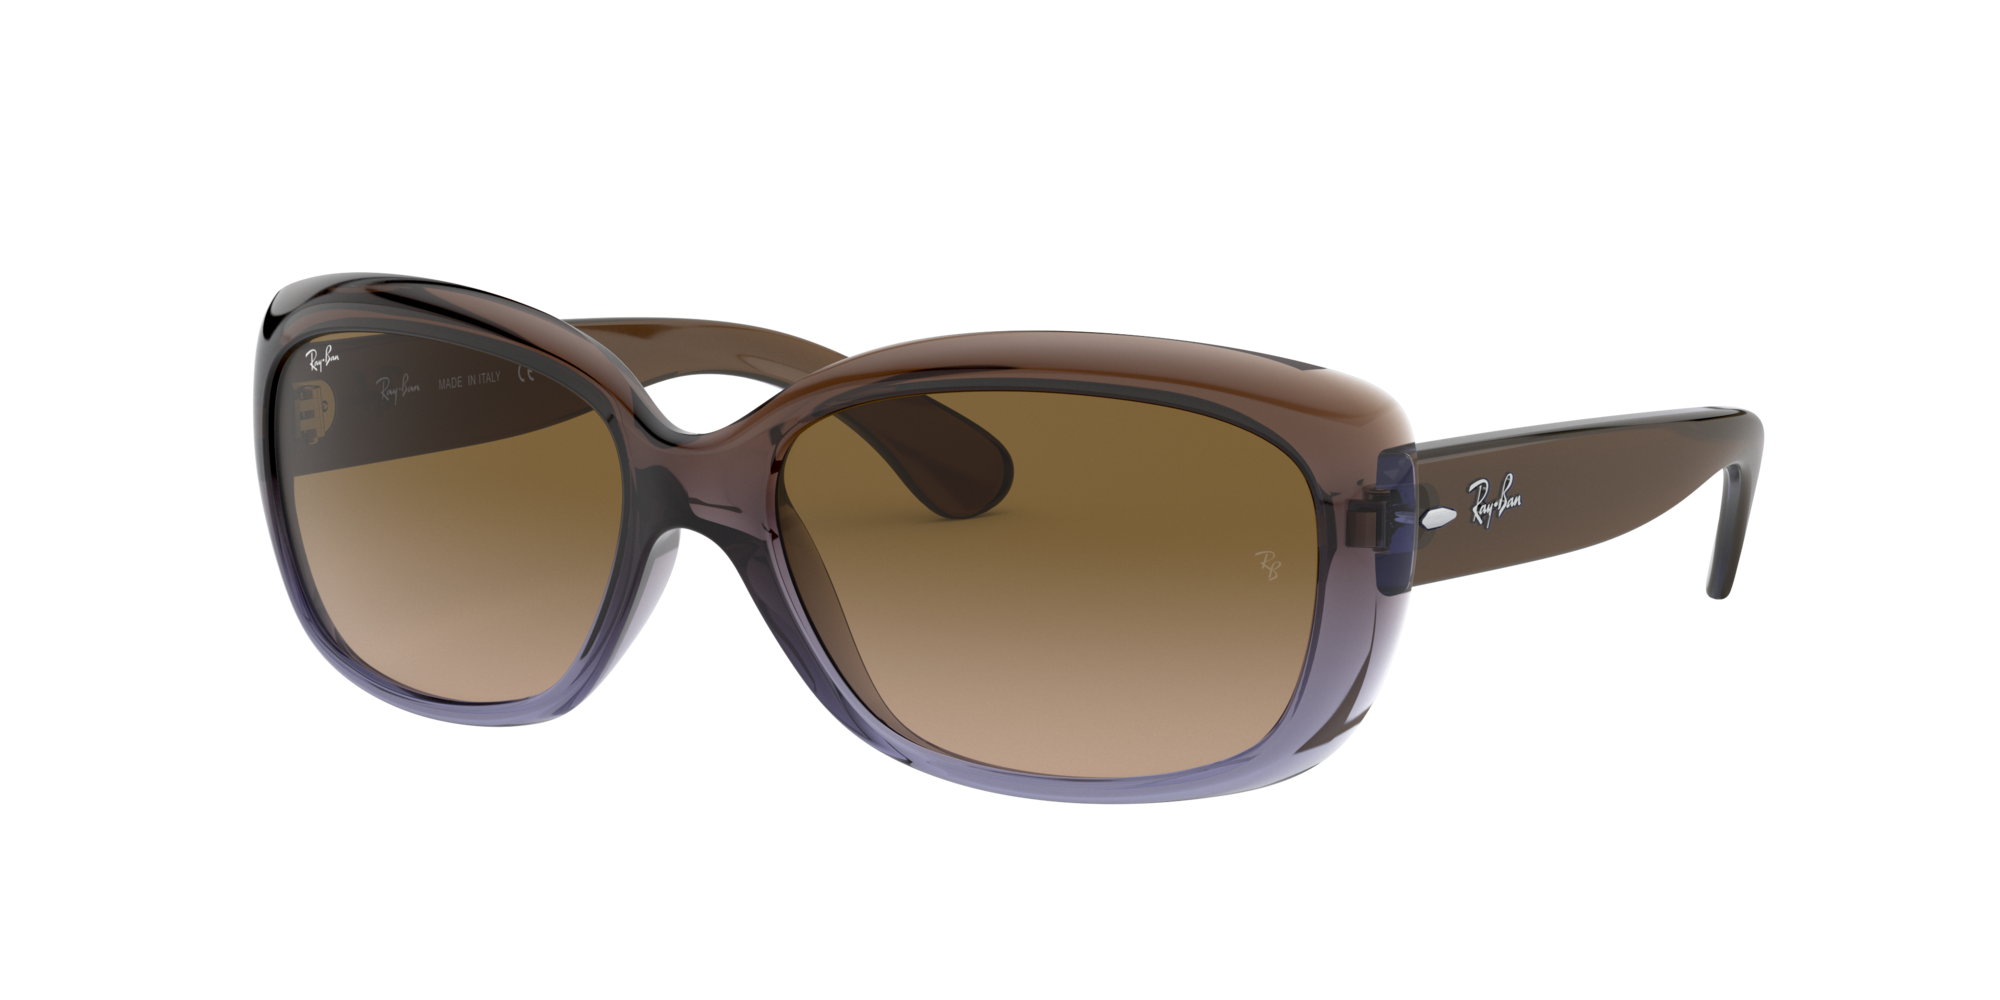 Ray-Ban Sonnenbrille in Braun RB4101 860/51 58 JACKIE OHH